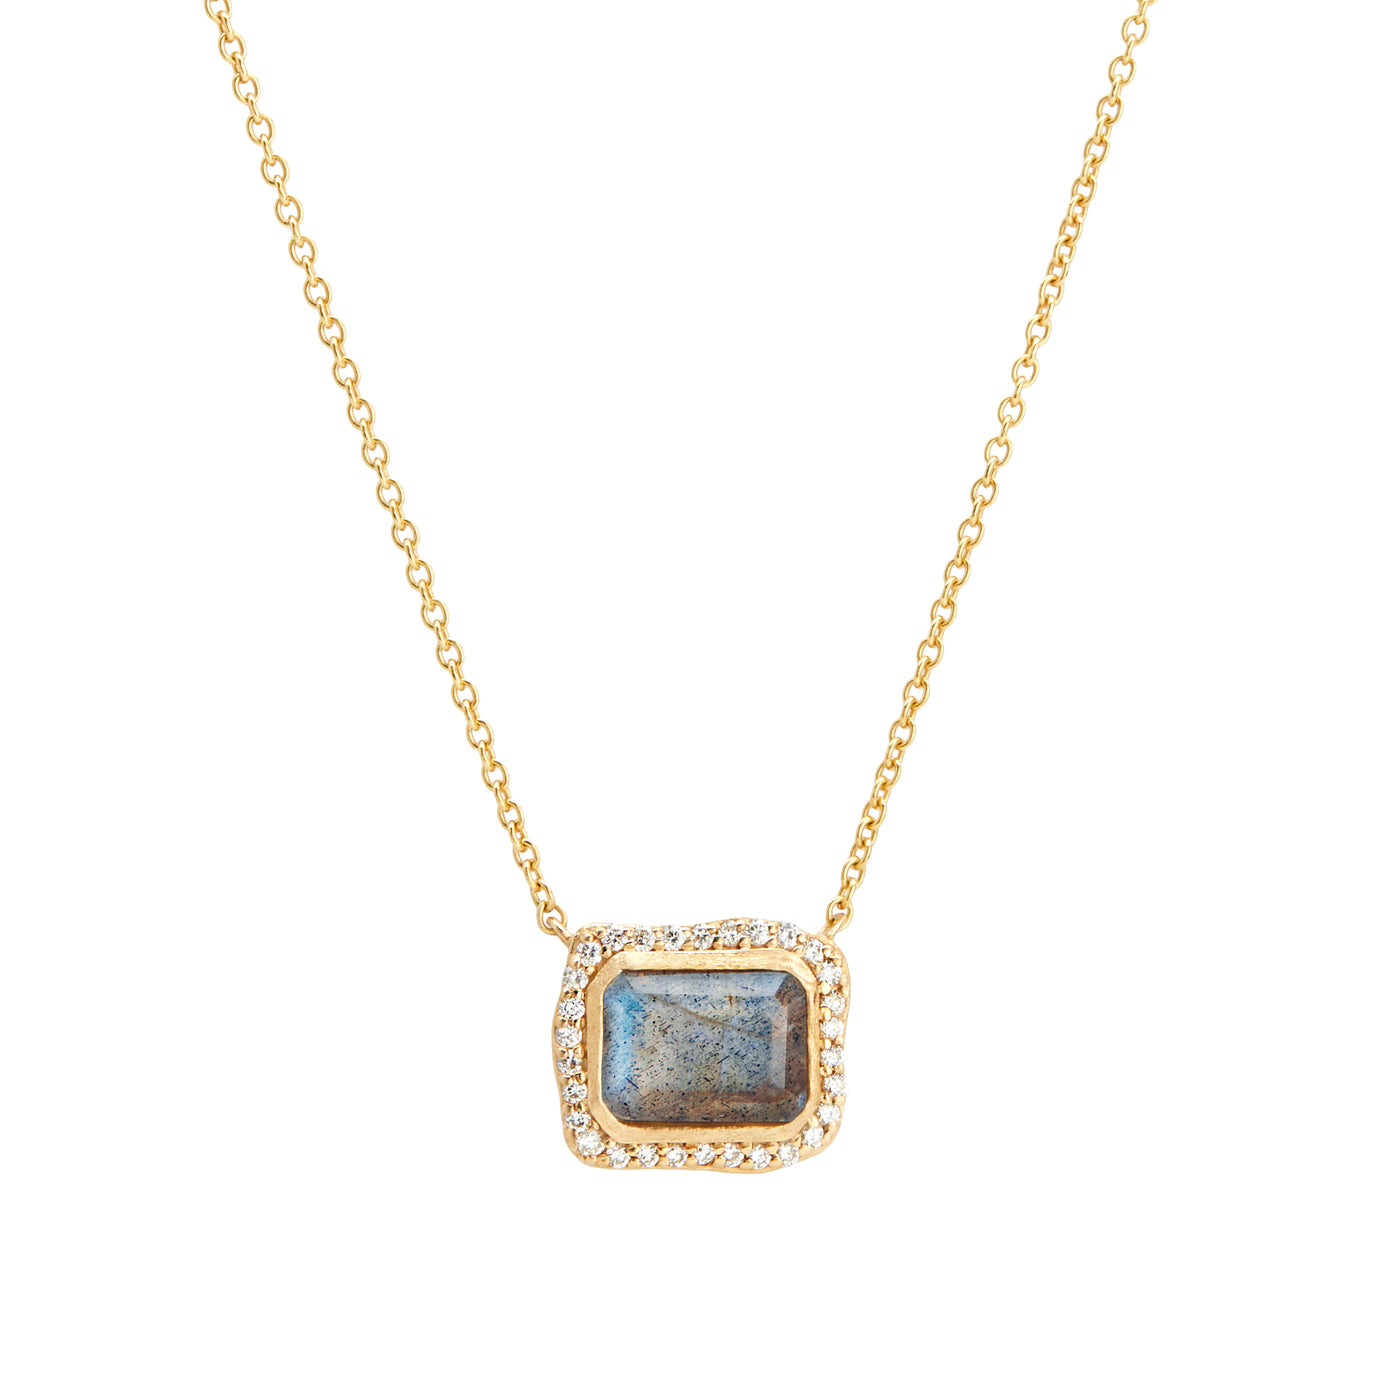 14 Karat Yellow Gold Necklace with Rectangle Shaped Labradorite Stone with Halo of White Diamonds Against White Background